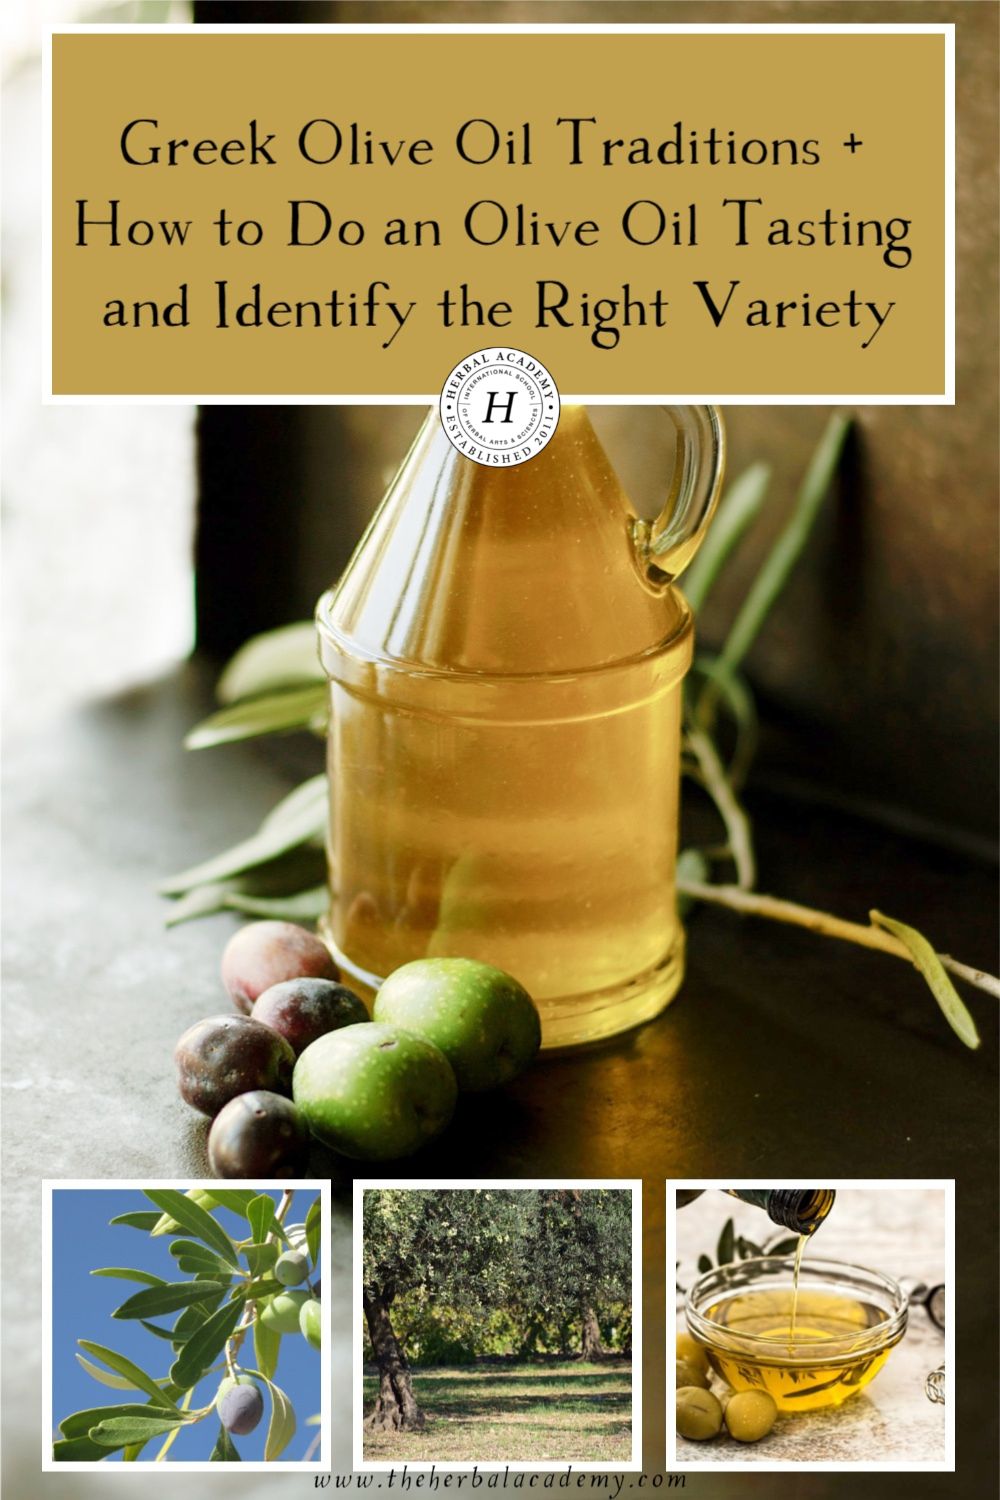 Greek Olive Oil Traditions + How to Do an Olive Oil Tasting and Identify the Best Variety | Herbal Academy | The benefits of high-quality olive oil have wide-ranging, lasting effects on the body and can support the body in many ways.